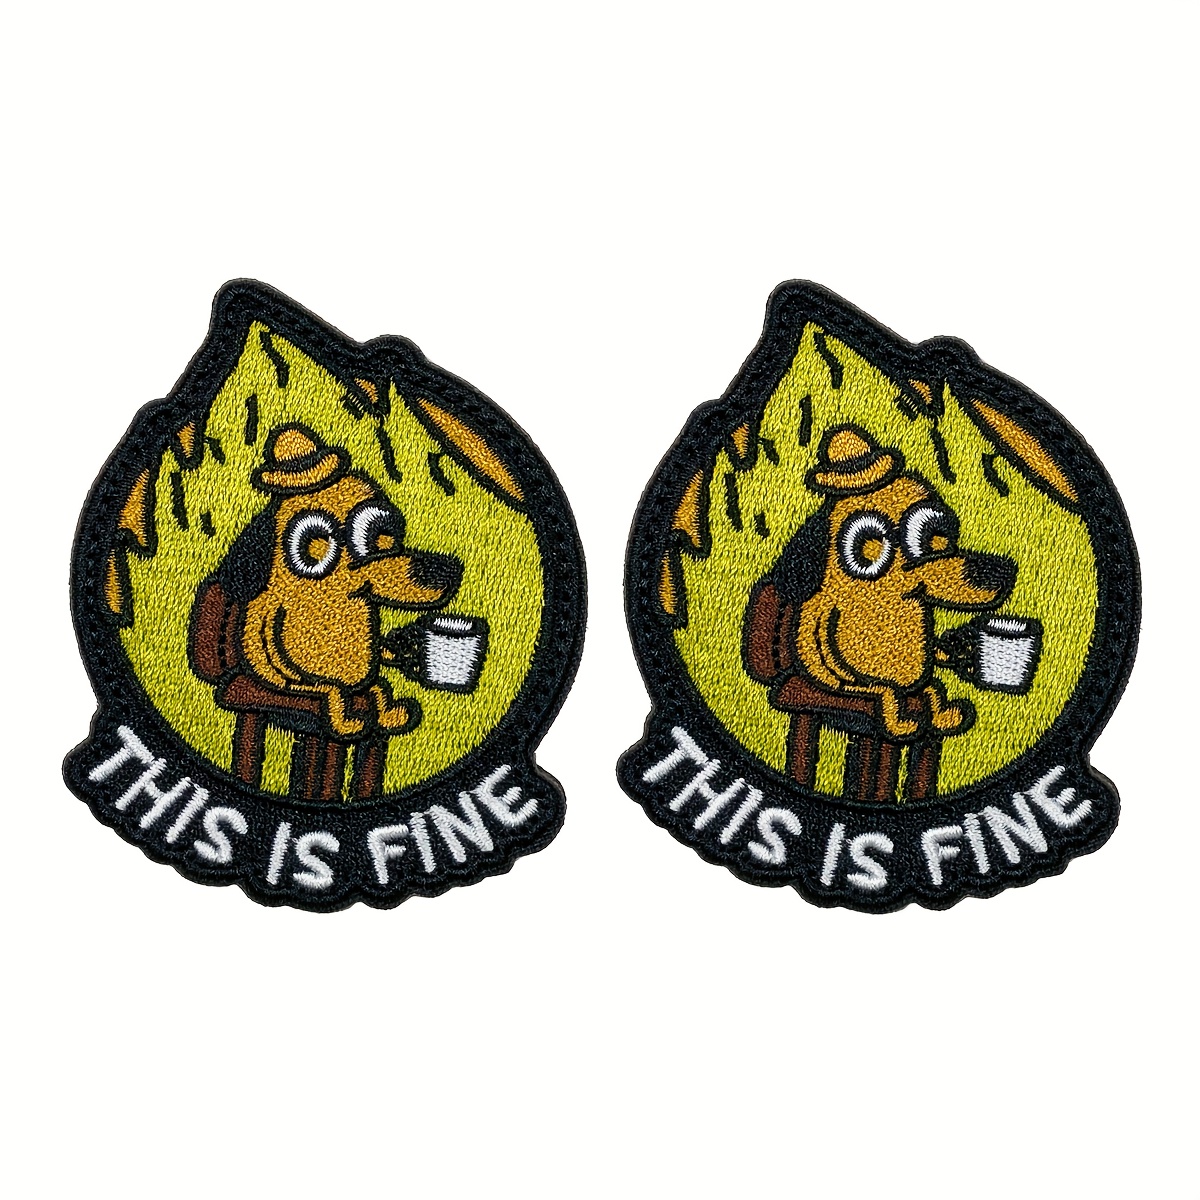 Cowabunga It is Patch, Morale Patches Tactical Funny Embroidered